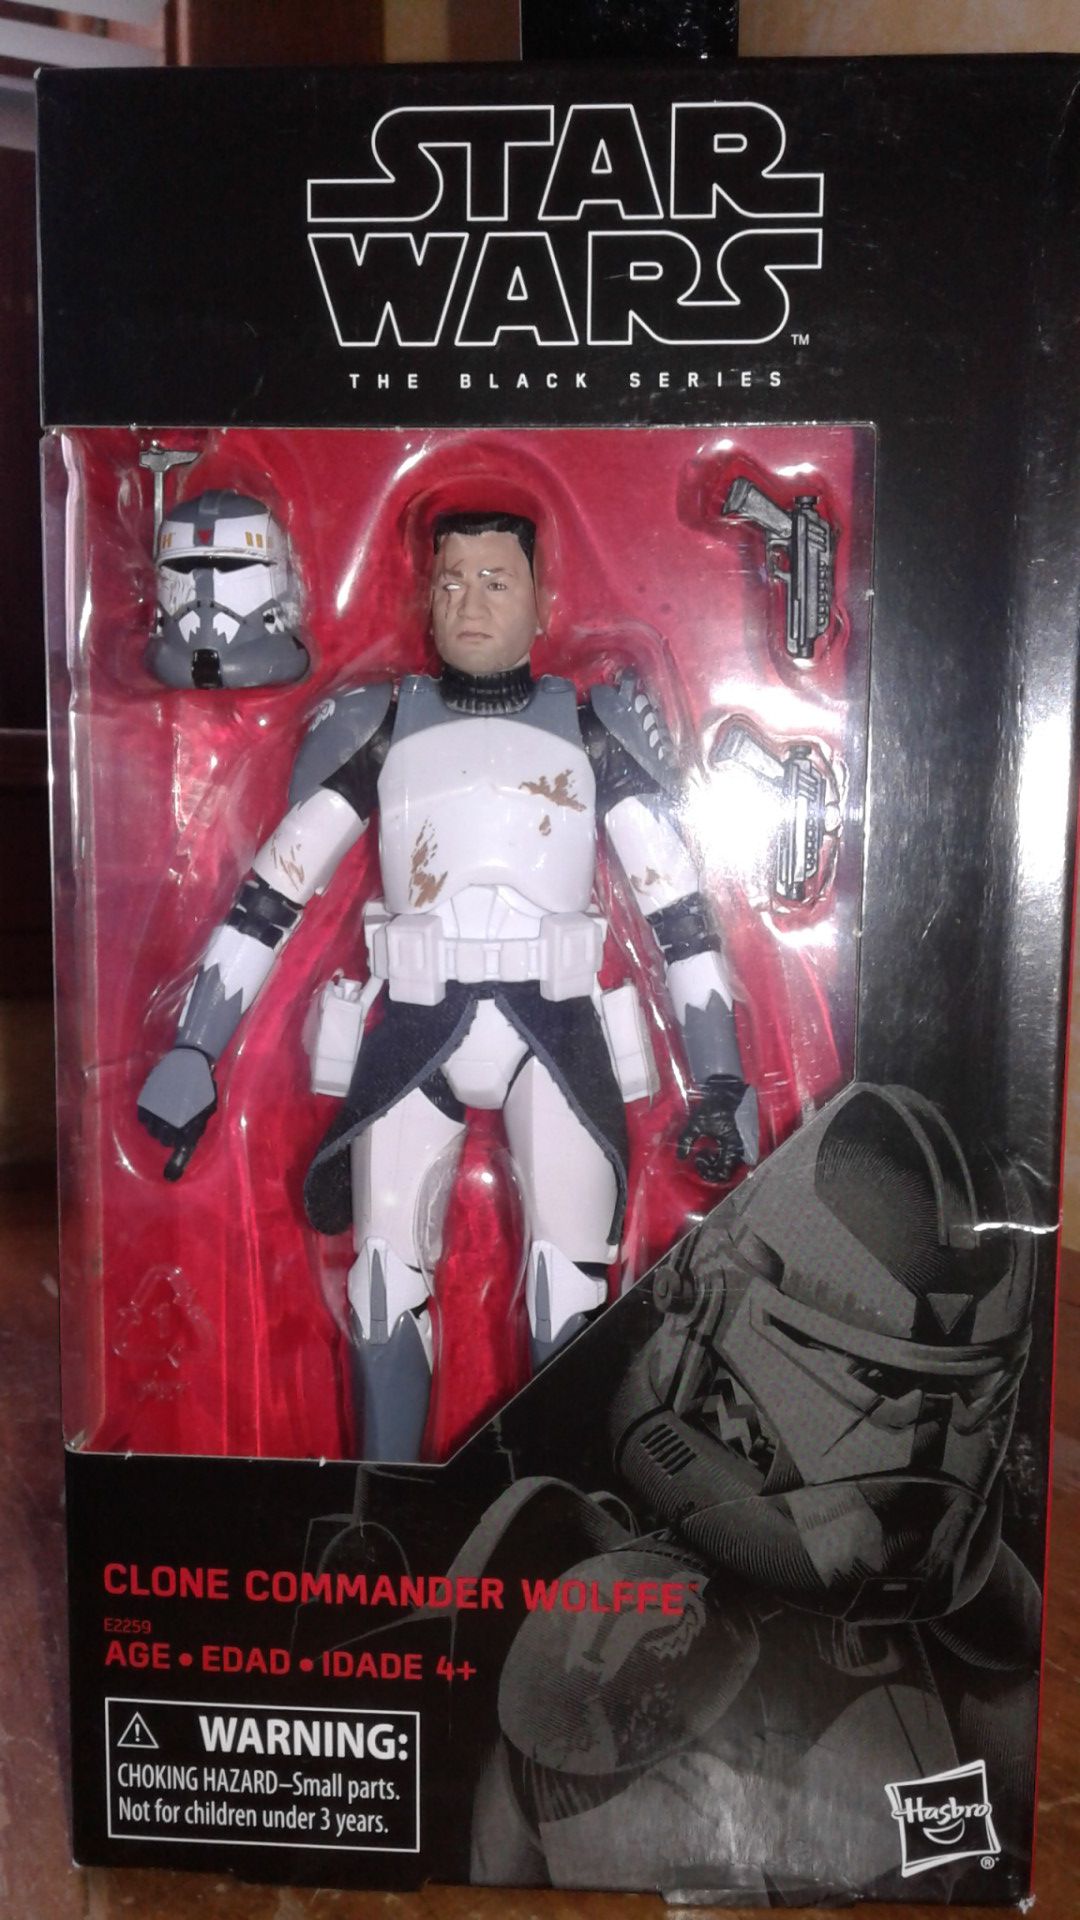 Star wars the black series clone commander wolffe collectible action figure.